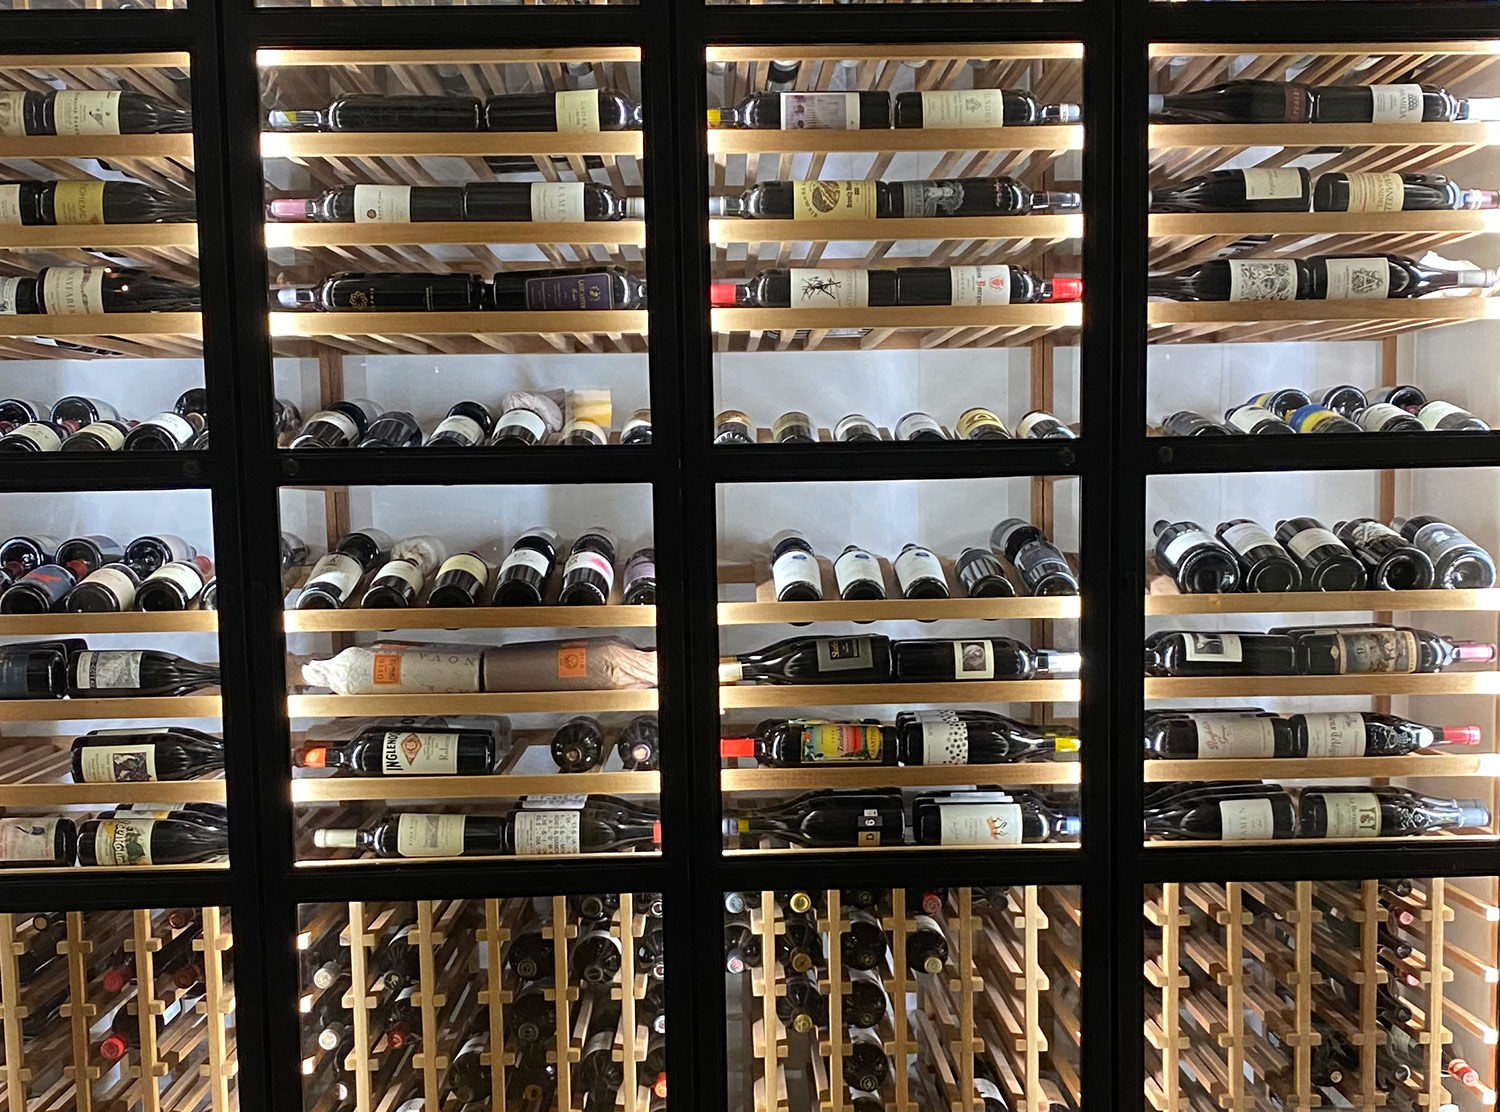 MacArthur Place Obviously, we are in wine country! The selection at the MacArthur wine cellar carries everything you could ever dream of and more. The highest quality wine you can get your hands on